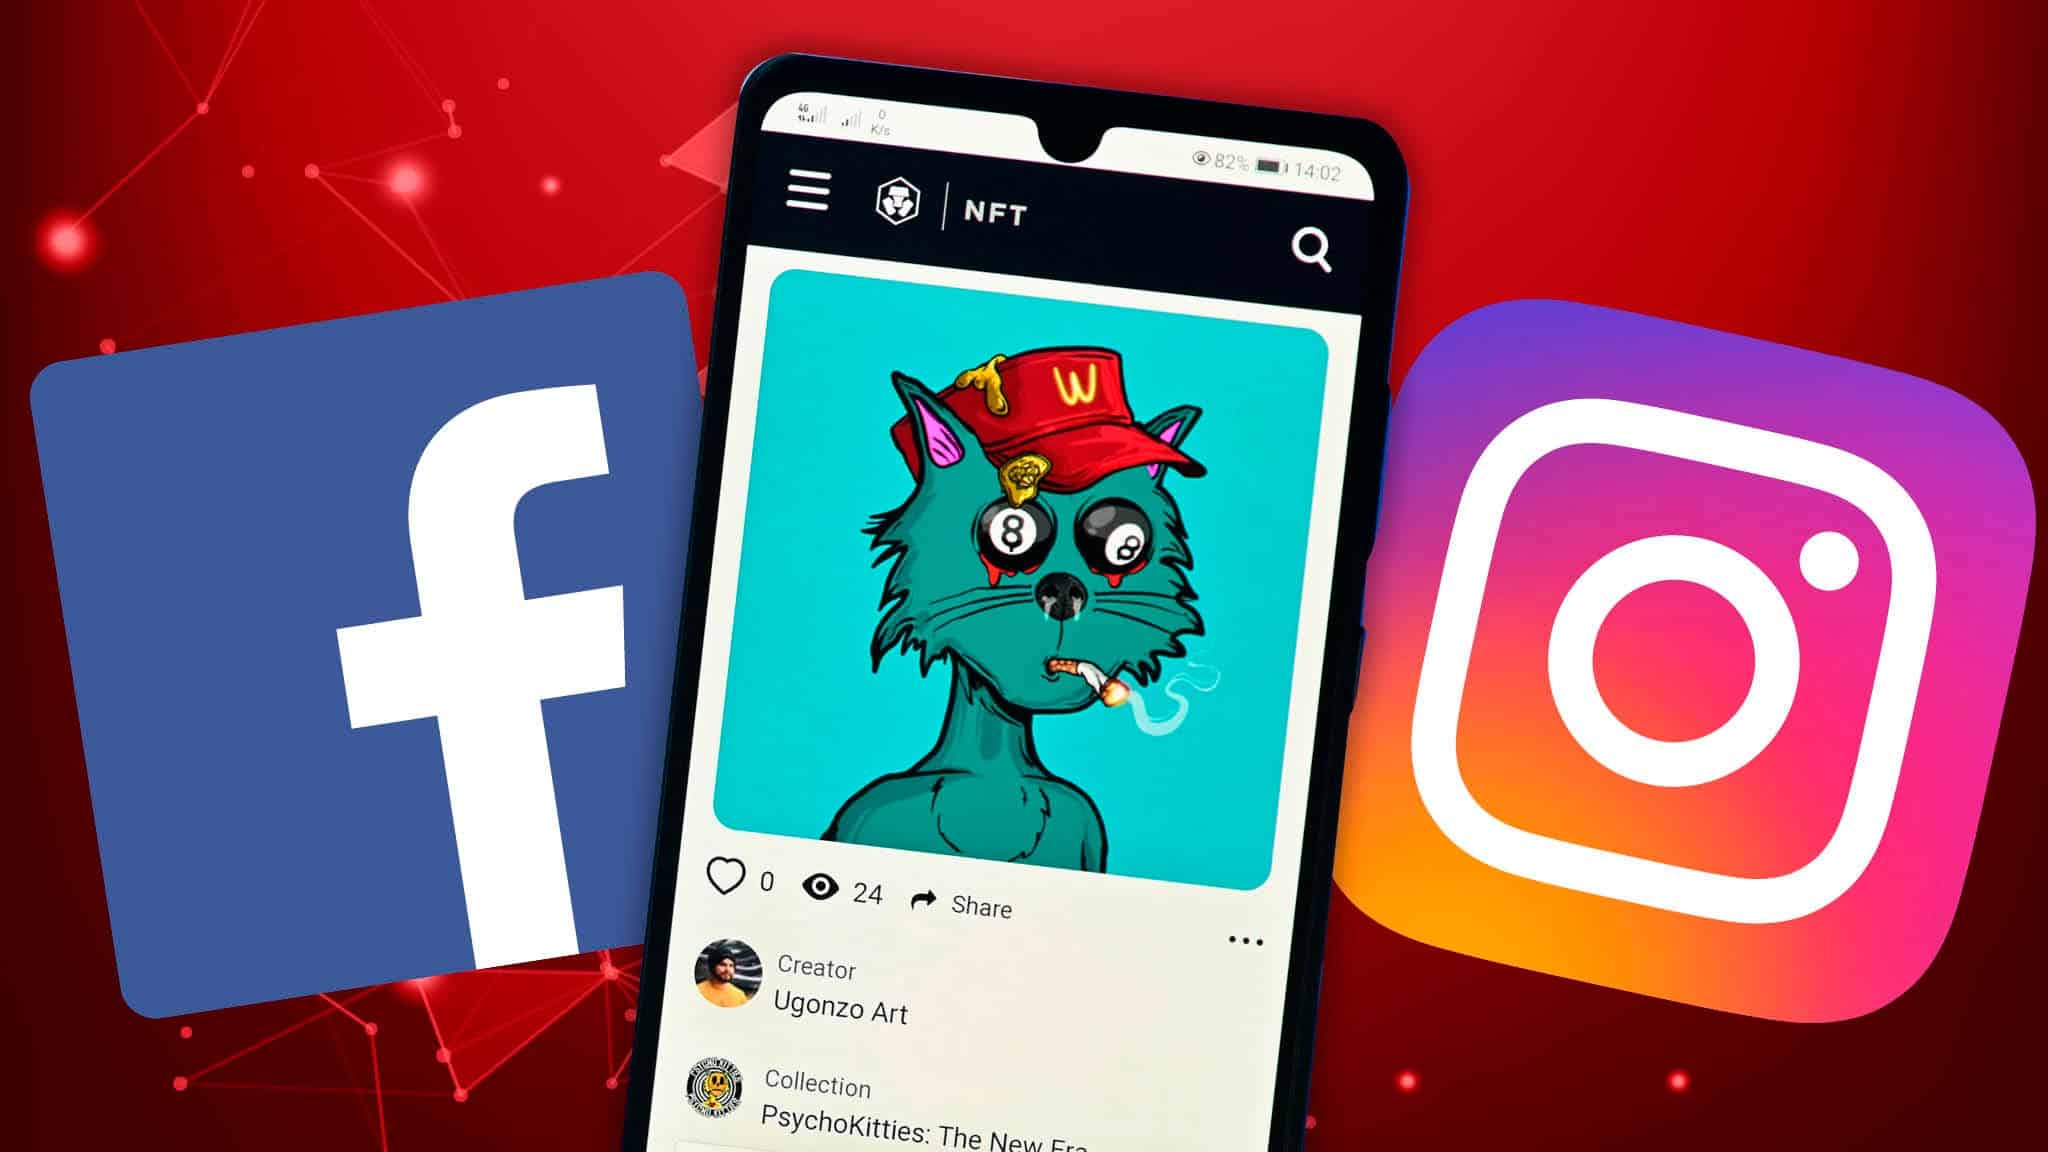 Facebook Rolls Out NFT Testing for the User Profiles